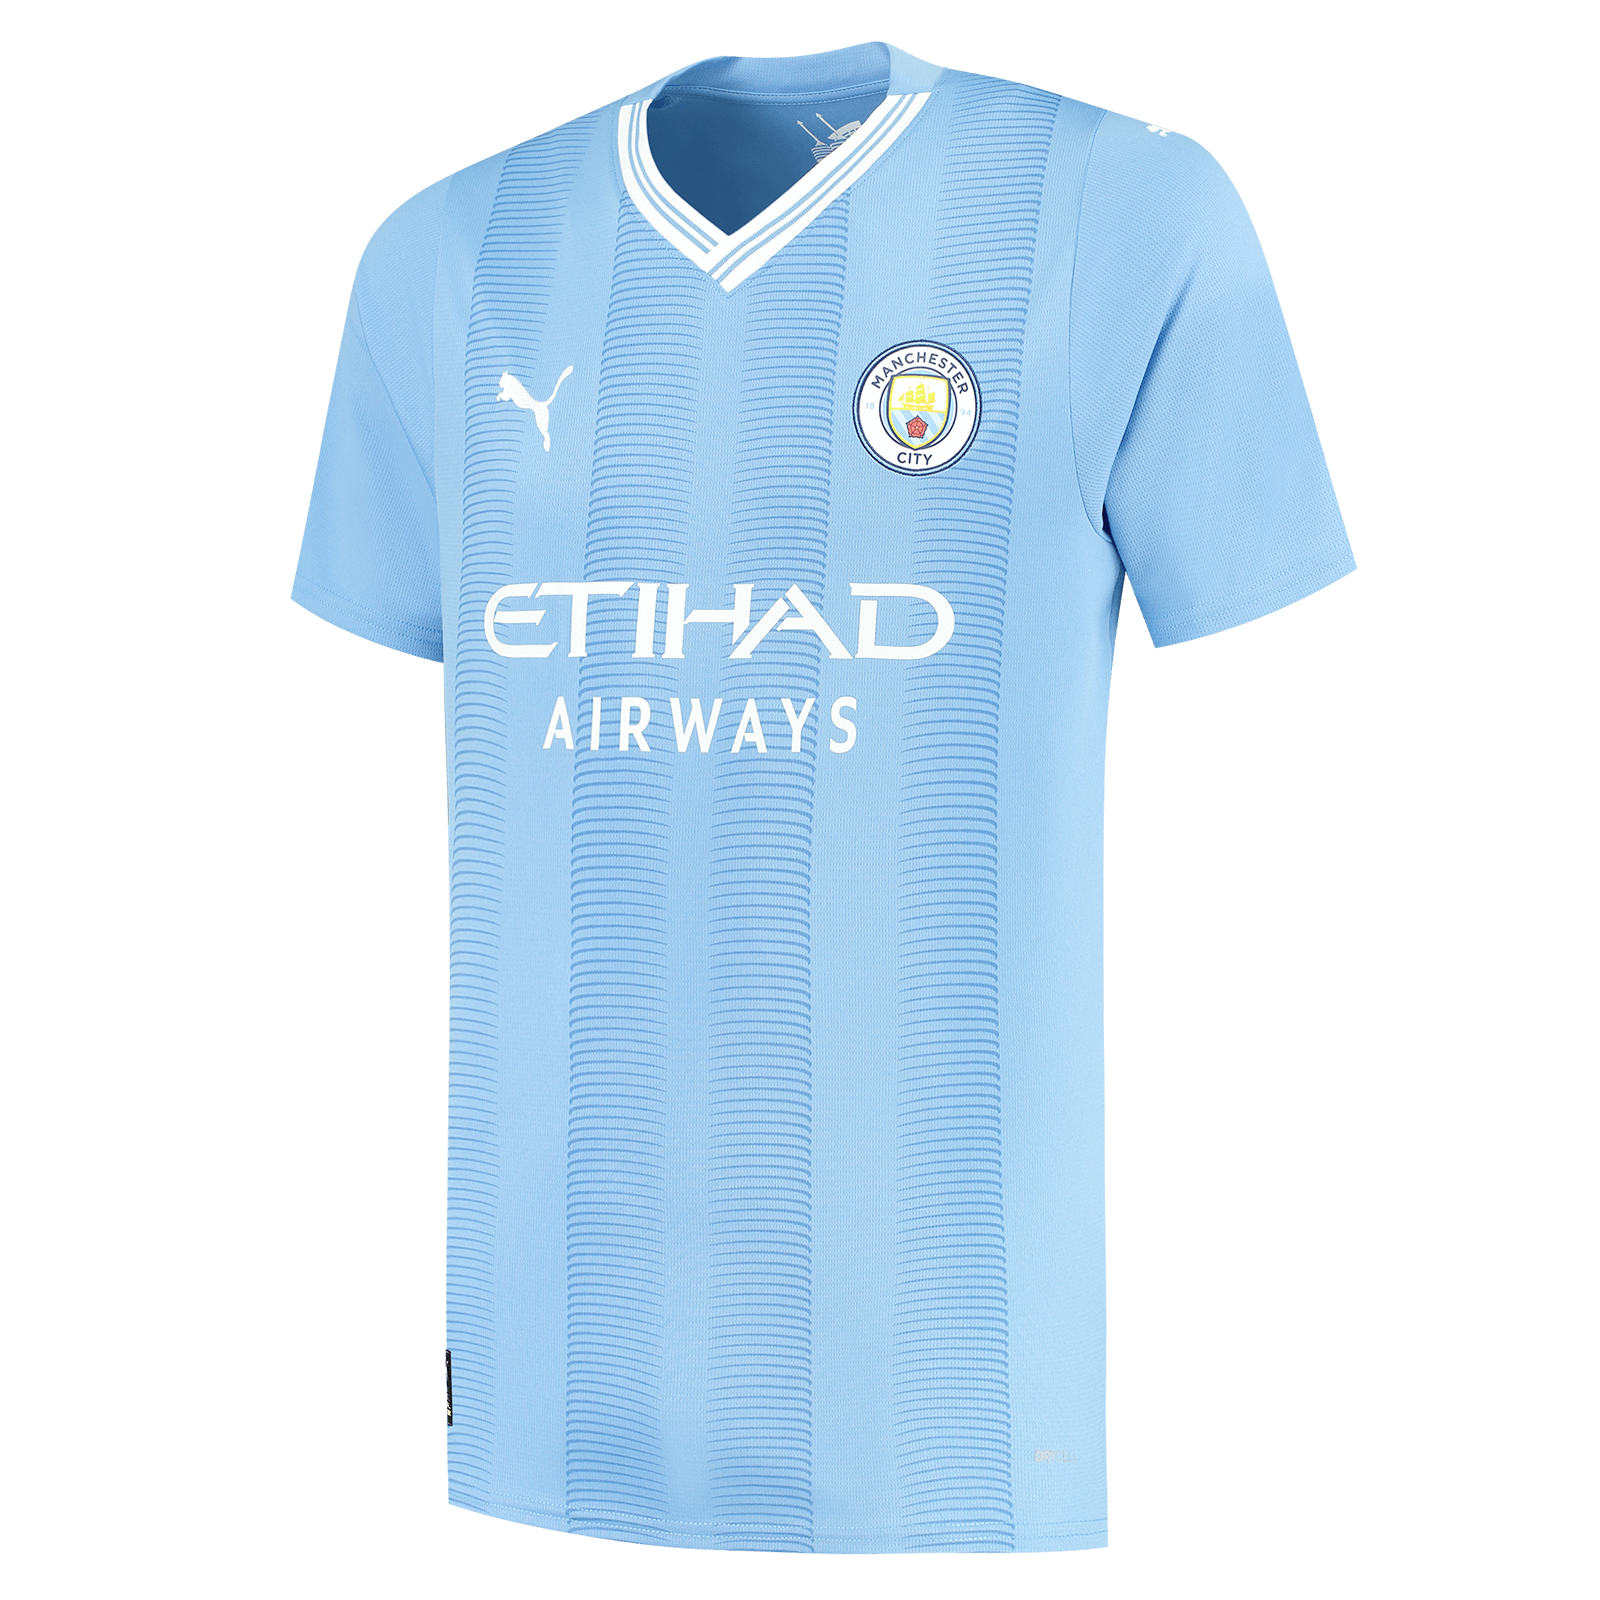 2023/24 Home Shirt, On sale now!